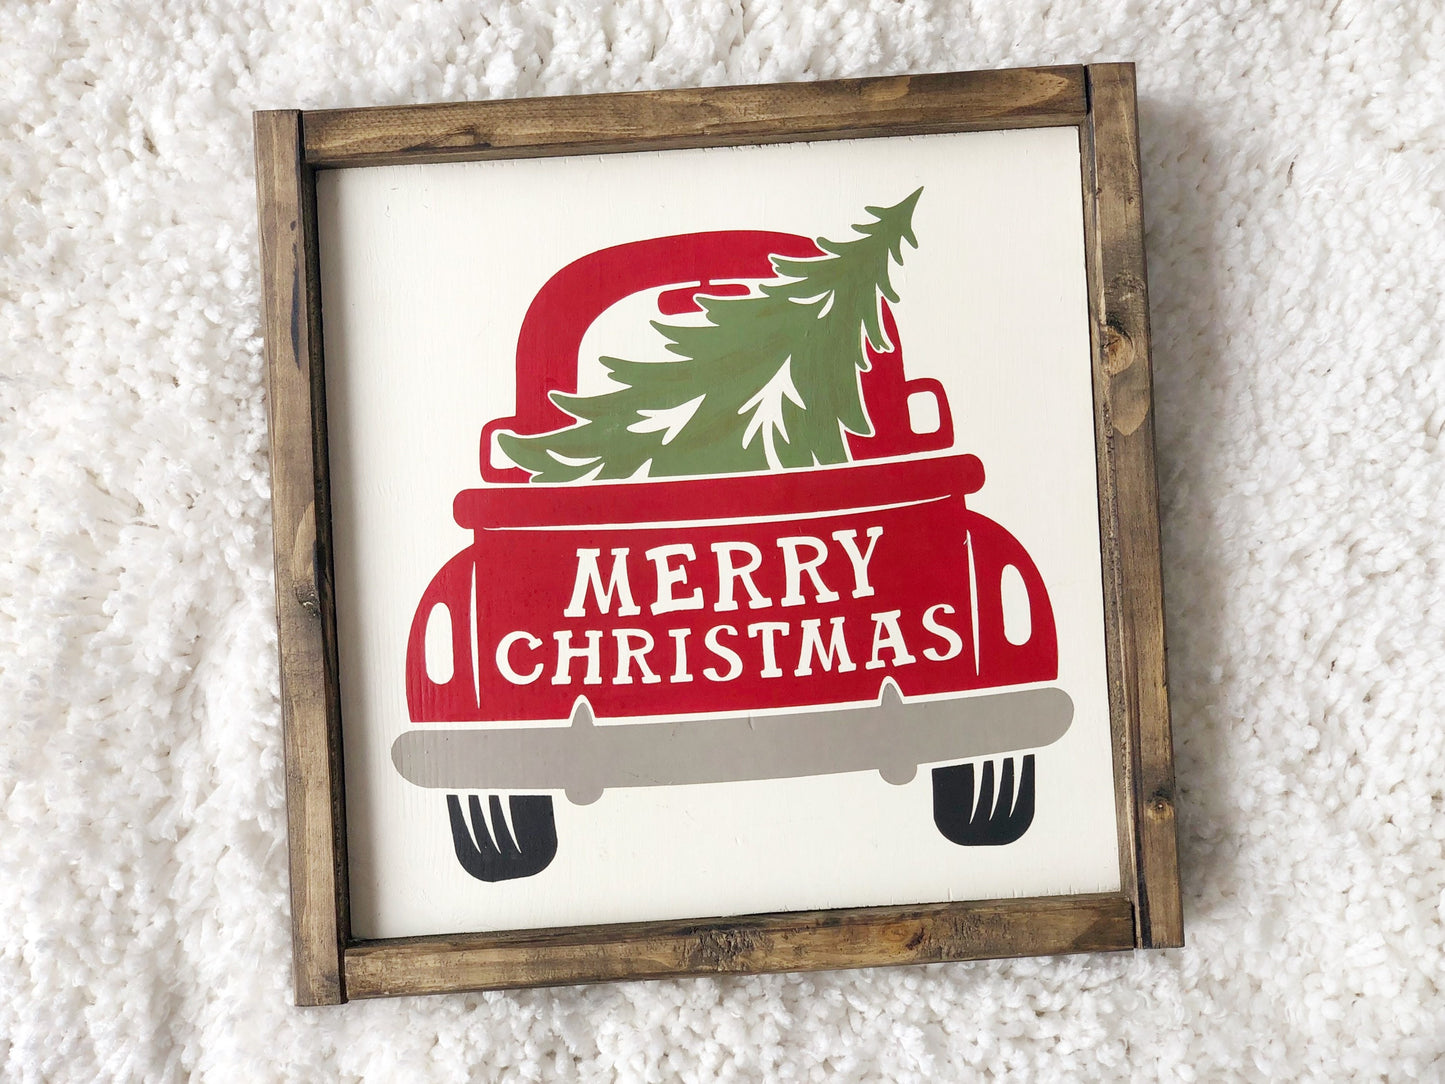 Merry Christmas Wood Sign - Vintage Red Truck Wall Hanging